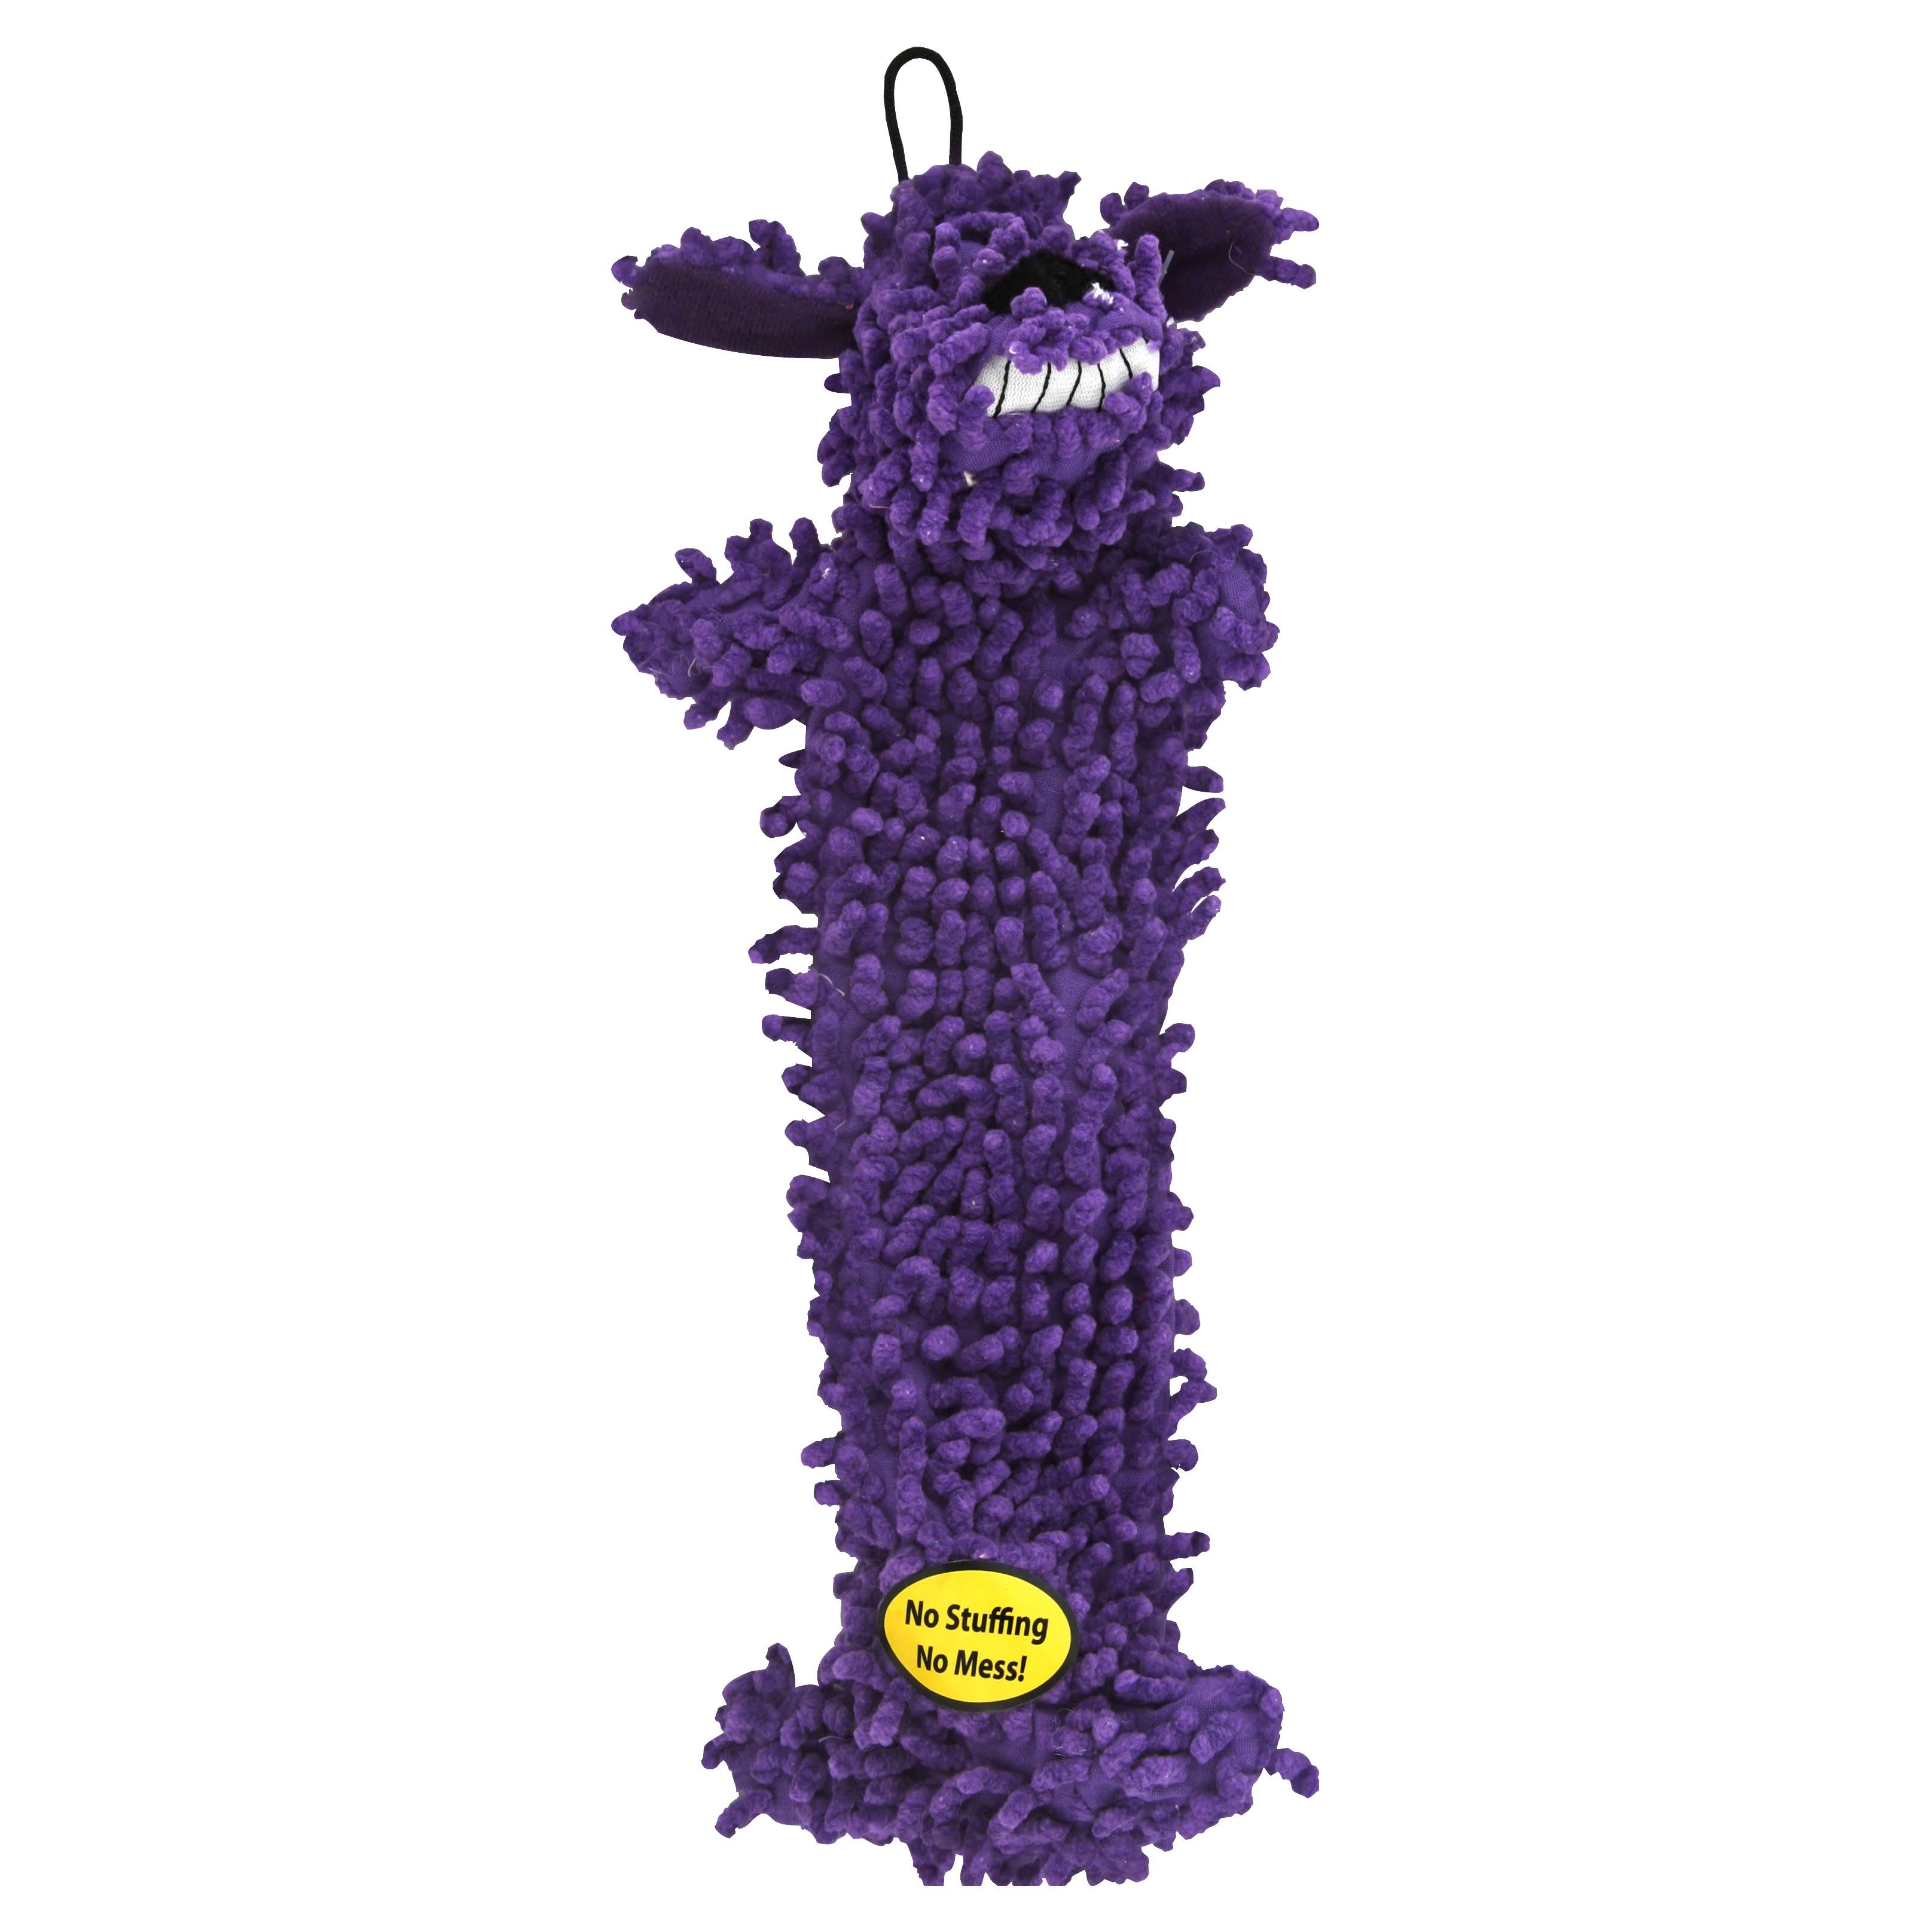 Multipet's Floppy Loofa Dog Toy - Assorted Colors, 12"